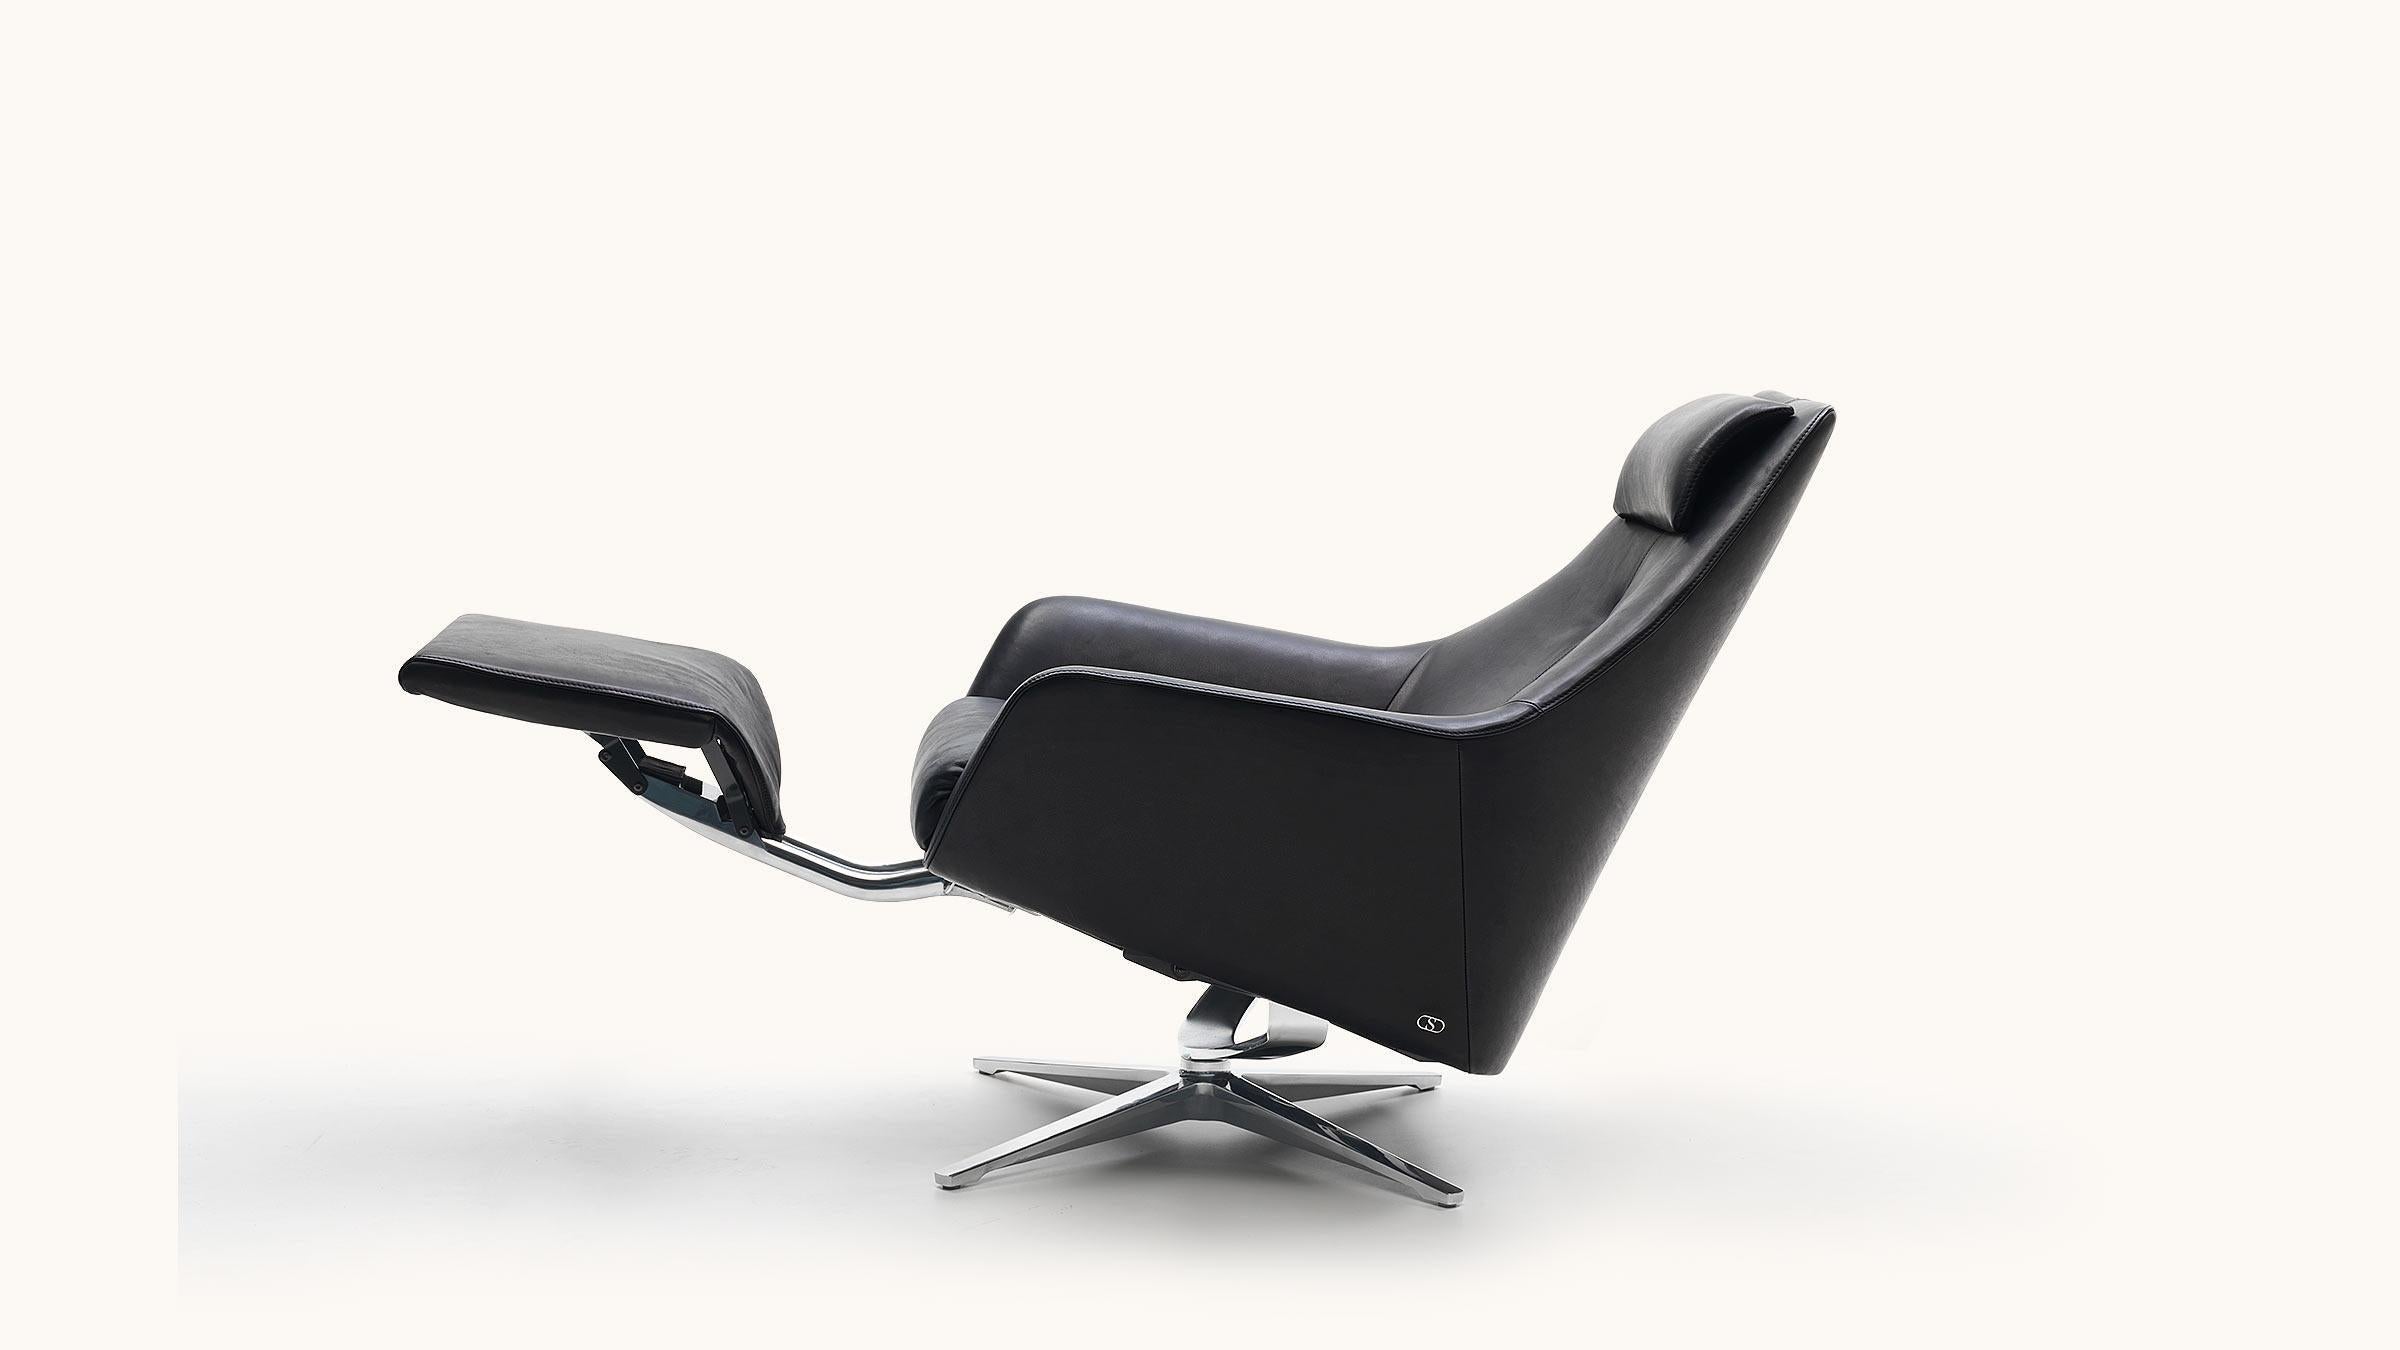 Swiss De Sede DS-277 Armchair with Footrest in Black Upholstery by Christian Werner For Sale